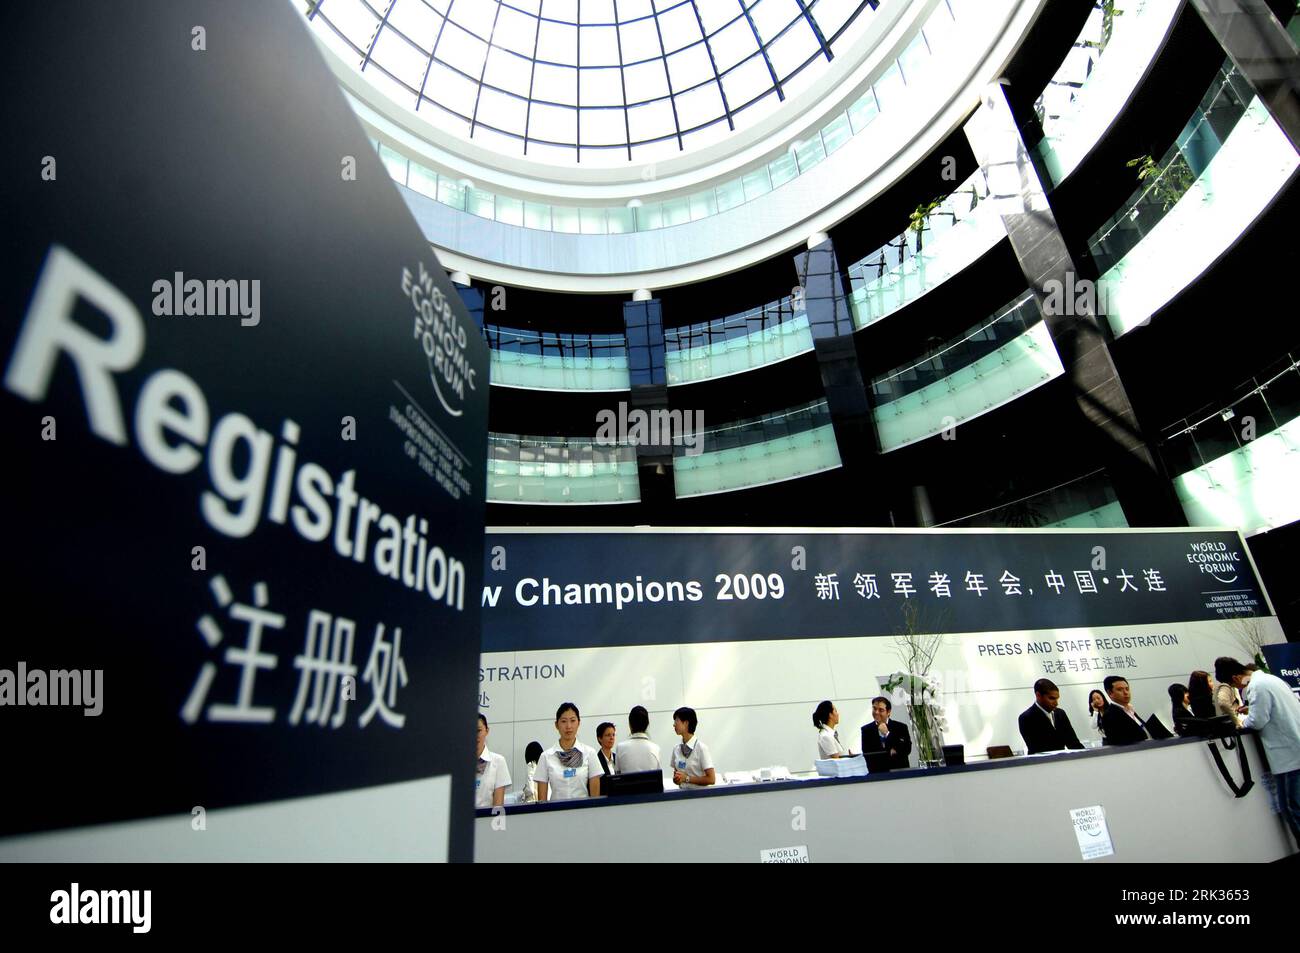 Bildnummer: 53331675  Datum: 09.09.2009  Copyright: imago/Xinhua (090909) -- DALIAN, Sept. 9, 2009 (Xinhua) -- Photo taken on Sept. 9, 2009 shows the registration area of the Annual Meeting of the New Champions 2009, or Summer Davos, in Dalian, northeast China s Liaoning Province. Participants and press registration of the meeting opened here on Wednesday. (Xinhua/Yao Jianfeng) (ypf) (DAVOS 2009)(1)CHINA-DALIAN-DAVOS-REGISTRATION PUBLICATIONxNOTxINxCHN Dalian Politik Sommerforum Davos kbdig xub 2009 quer o00 World Economic Forum o00 Weltwirtschaftsforum    Bildnummer 53331675 Date 09 09 2009 C Stock Photo